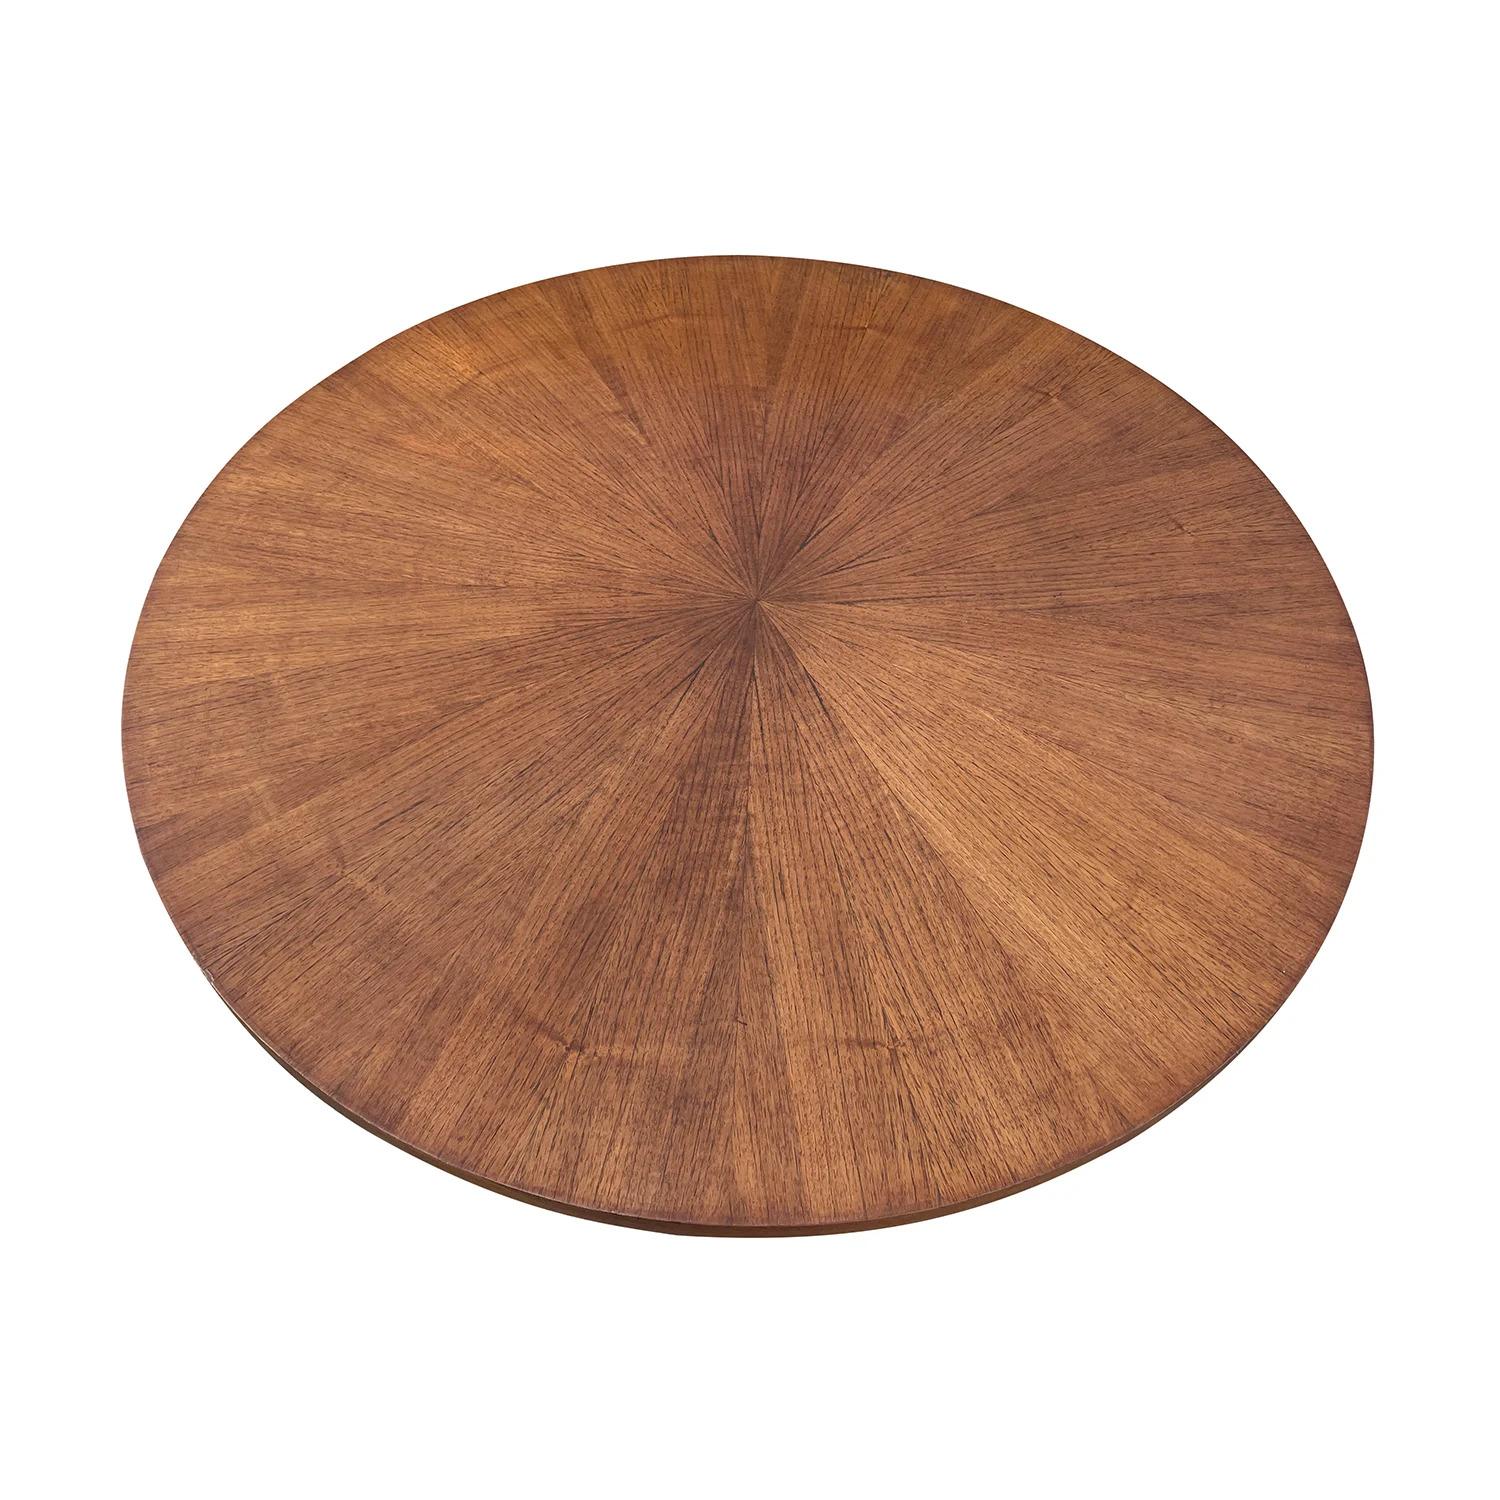 Metal 20th Century Italian Round Vintage Rosewood, Walnut Dining Room Table For Sale